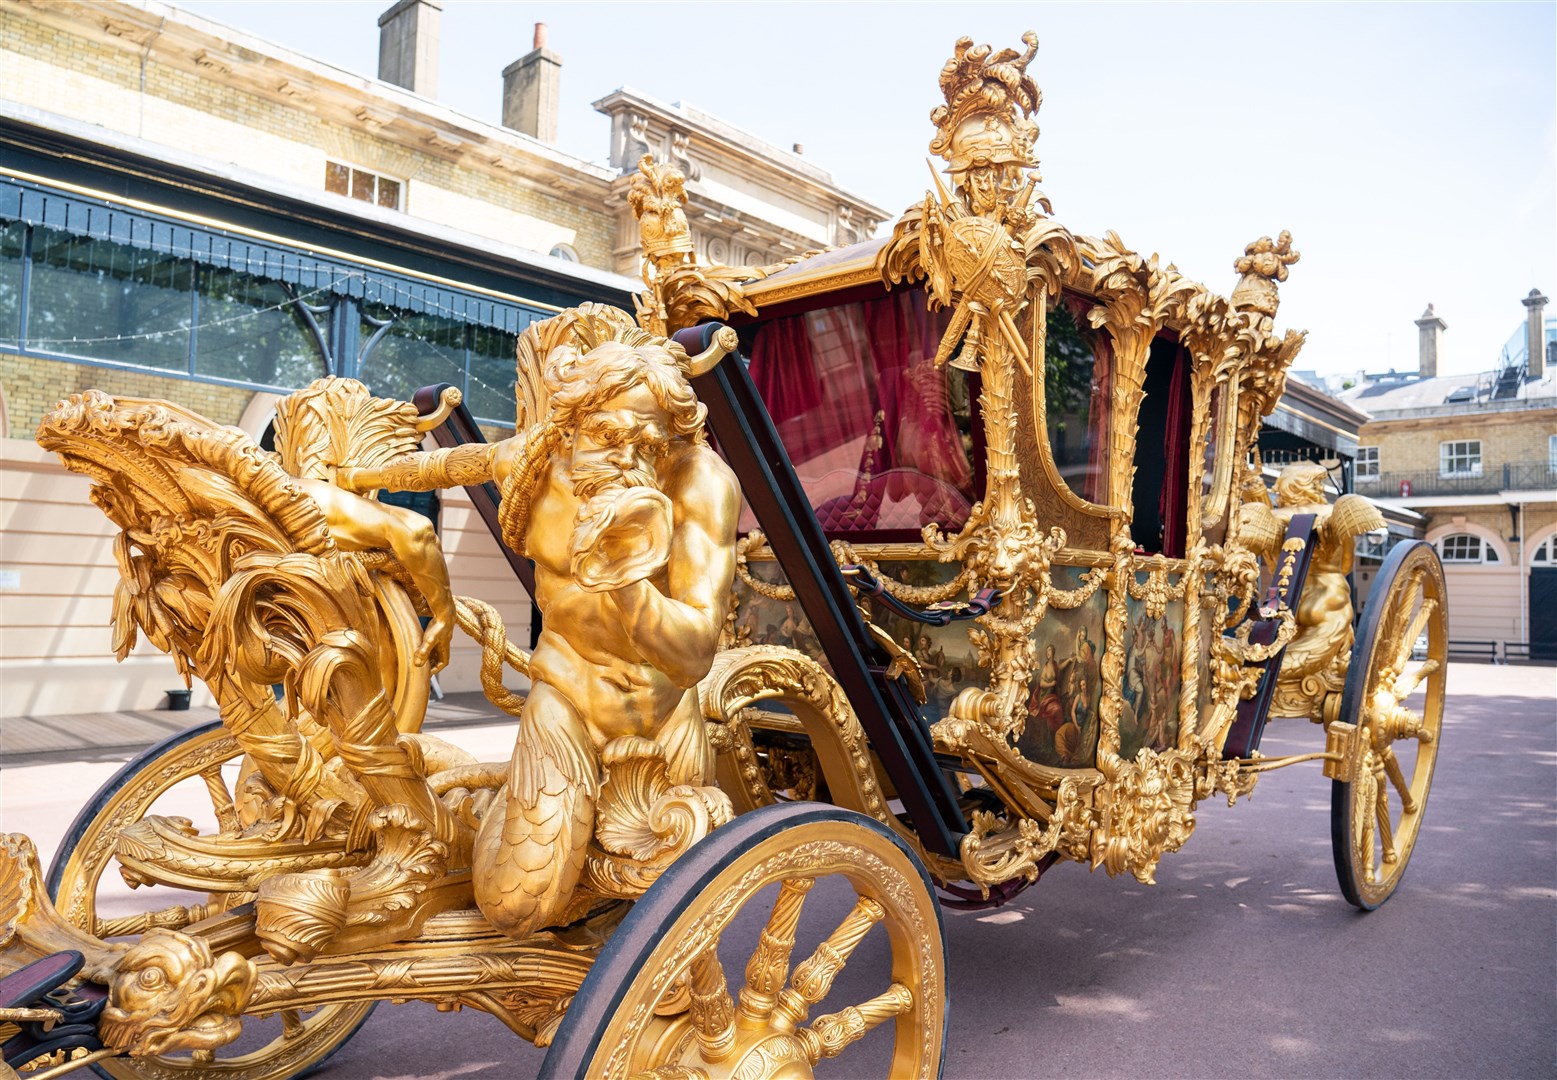 The richly decorated coach will be part of this year’s Platinum Jubilee Pageant (Dominic Lipinski/PA))